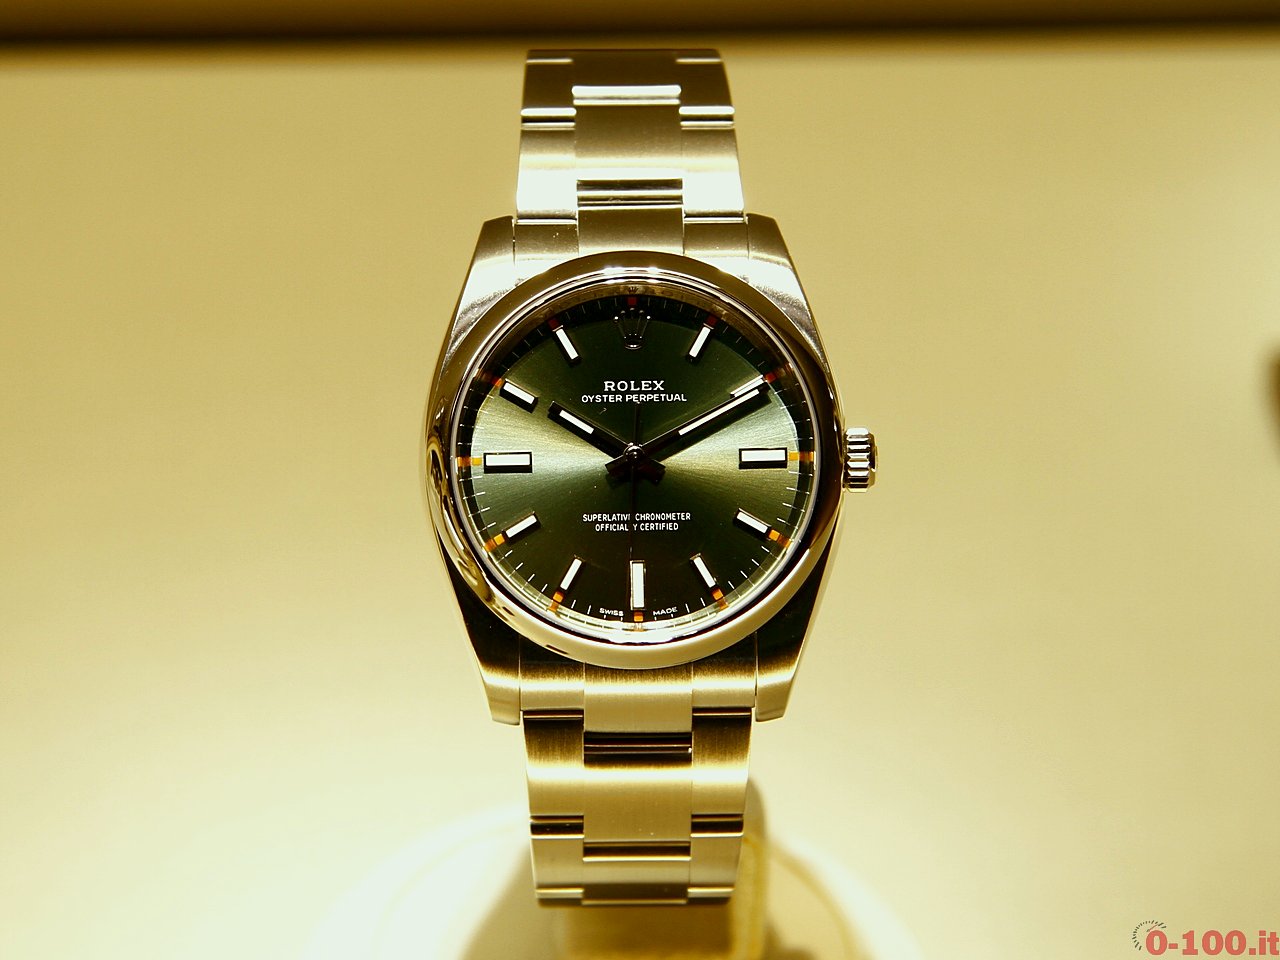 baselworld-2015_rolex-oyster-perpetual-39-0-100_3